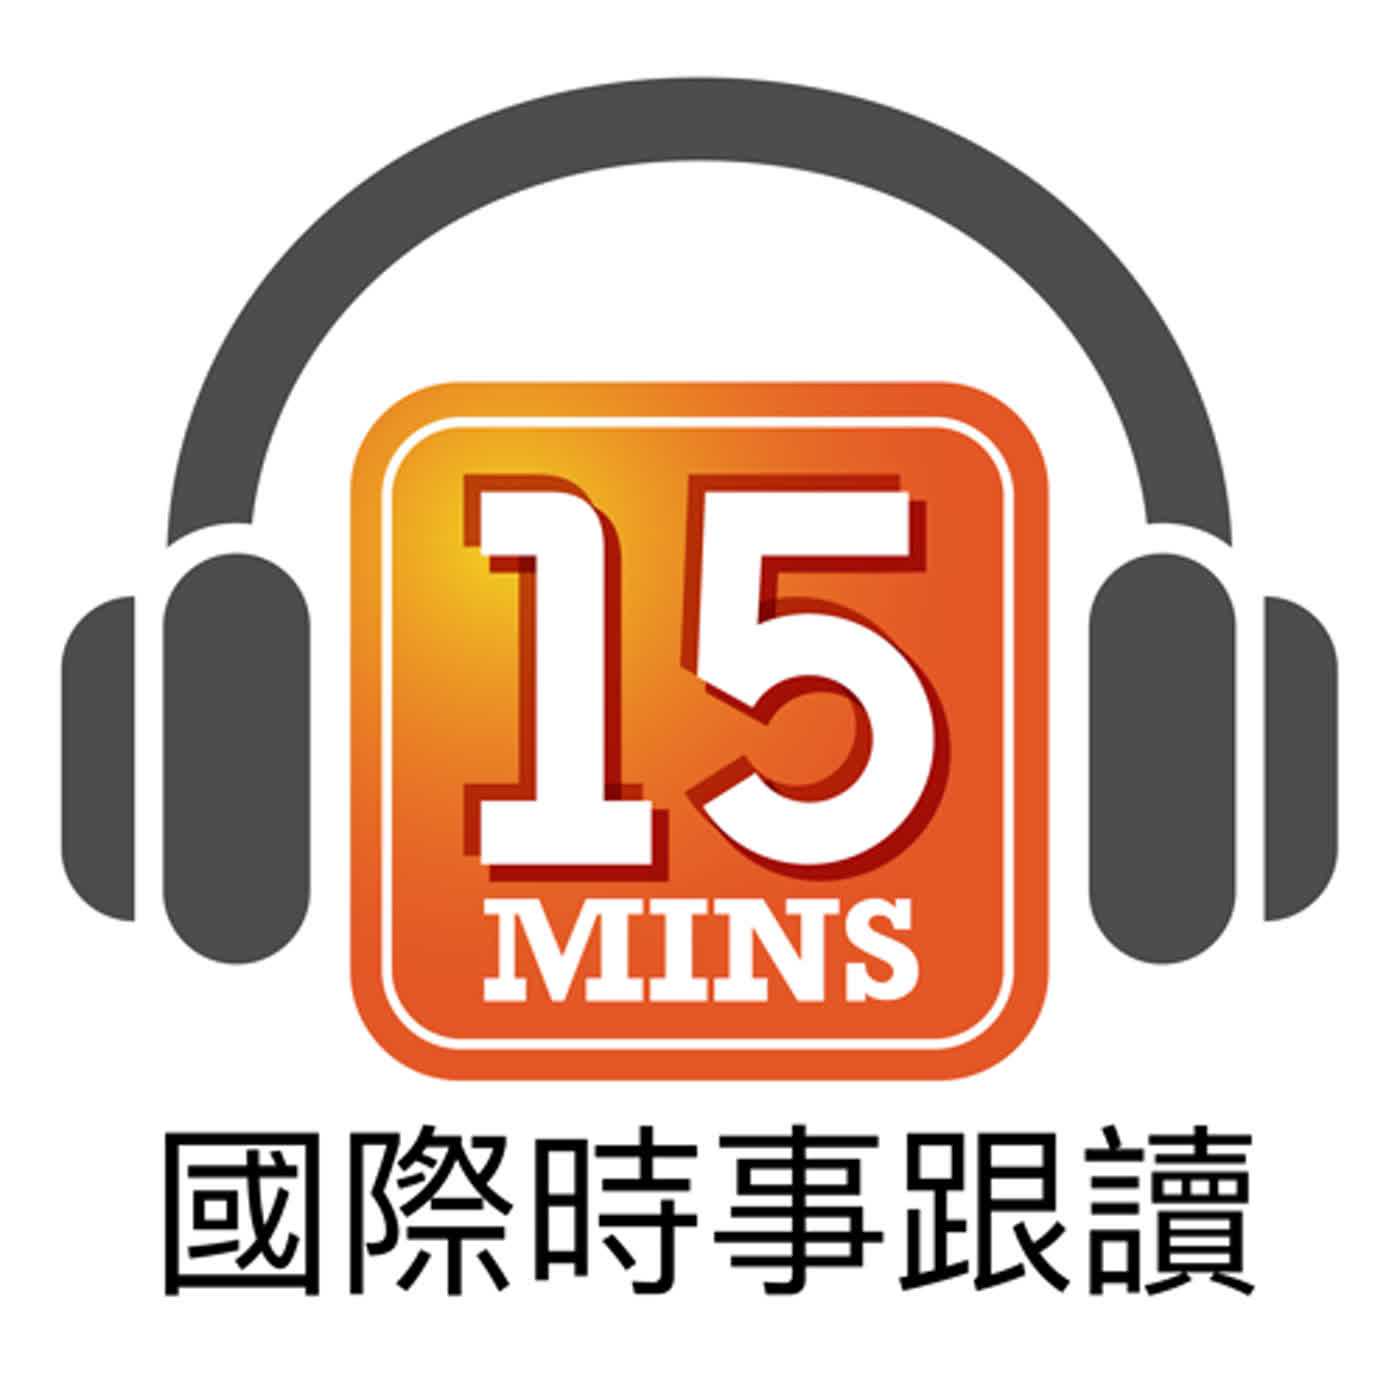 15Mins 名人正念語錄 Inspirations Ep.1: 運動巨星的強大信念 Quotes from GOATs in sports